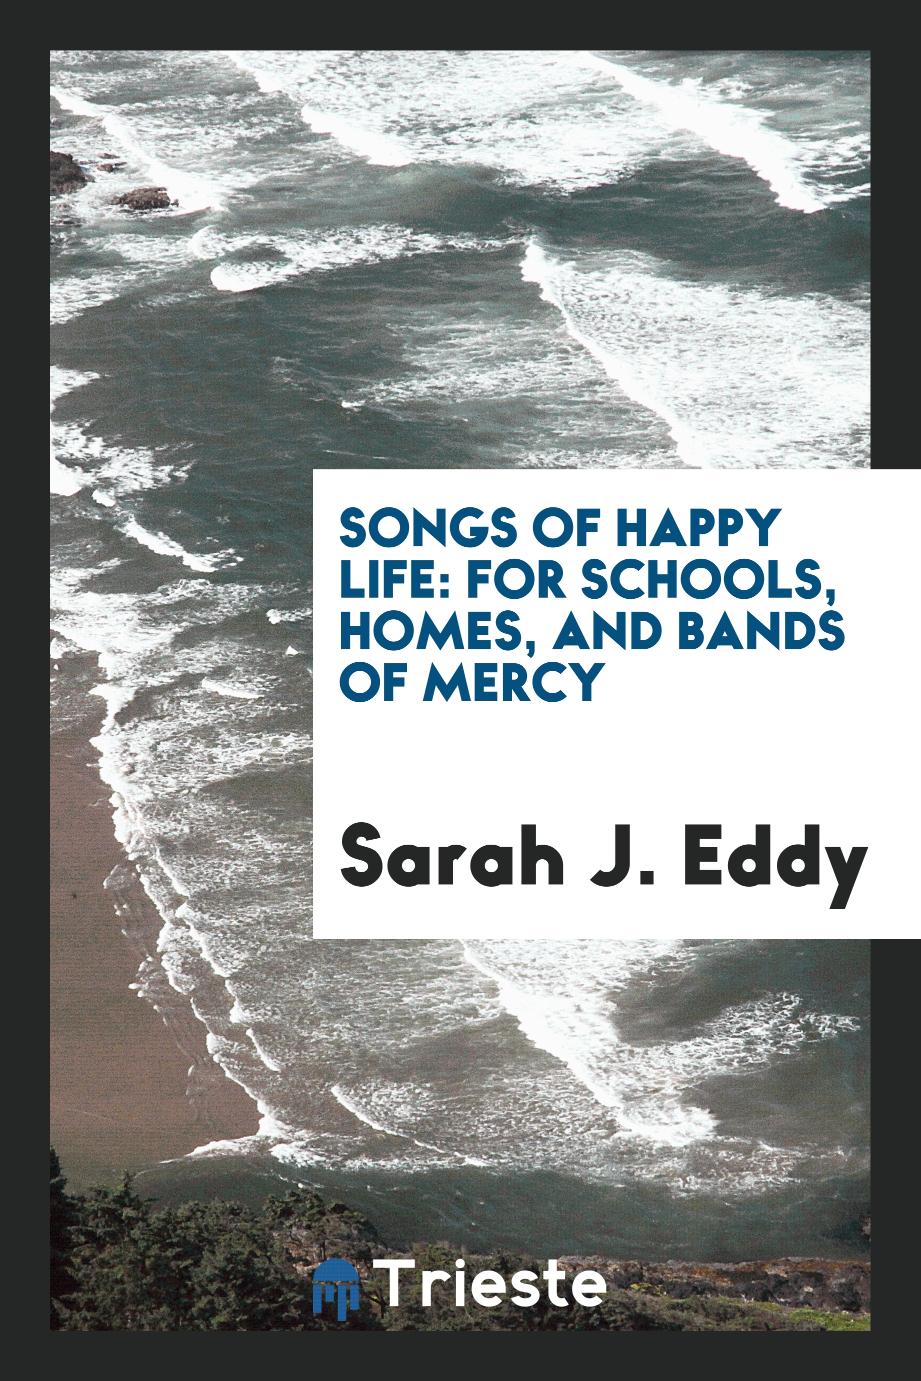 Songs of happy life: for schools, homes, and bands of mercy